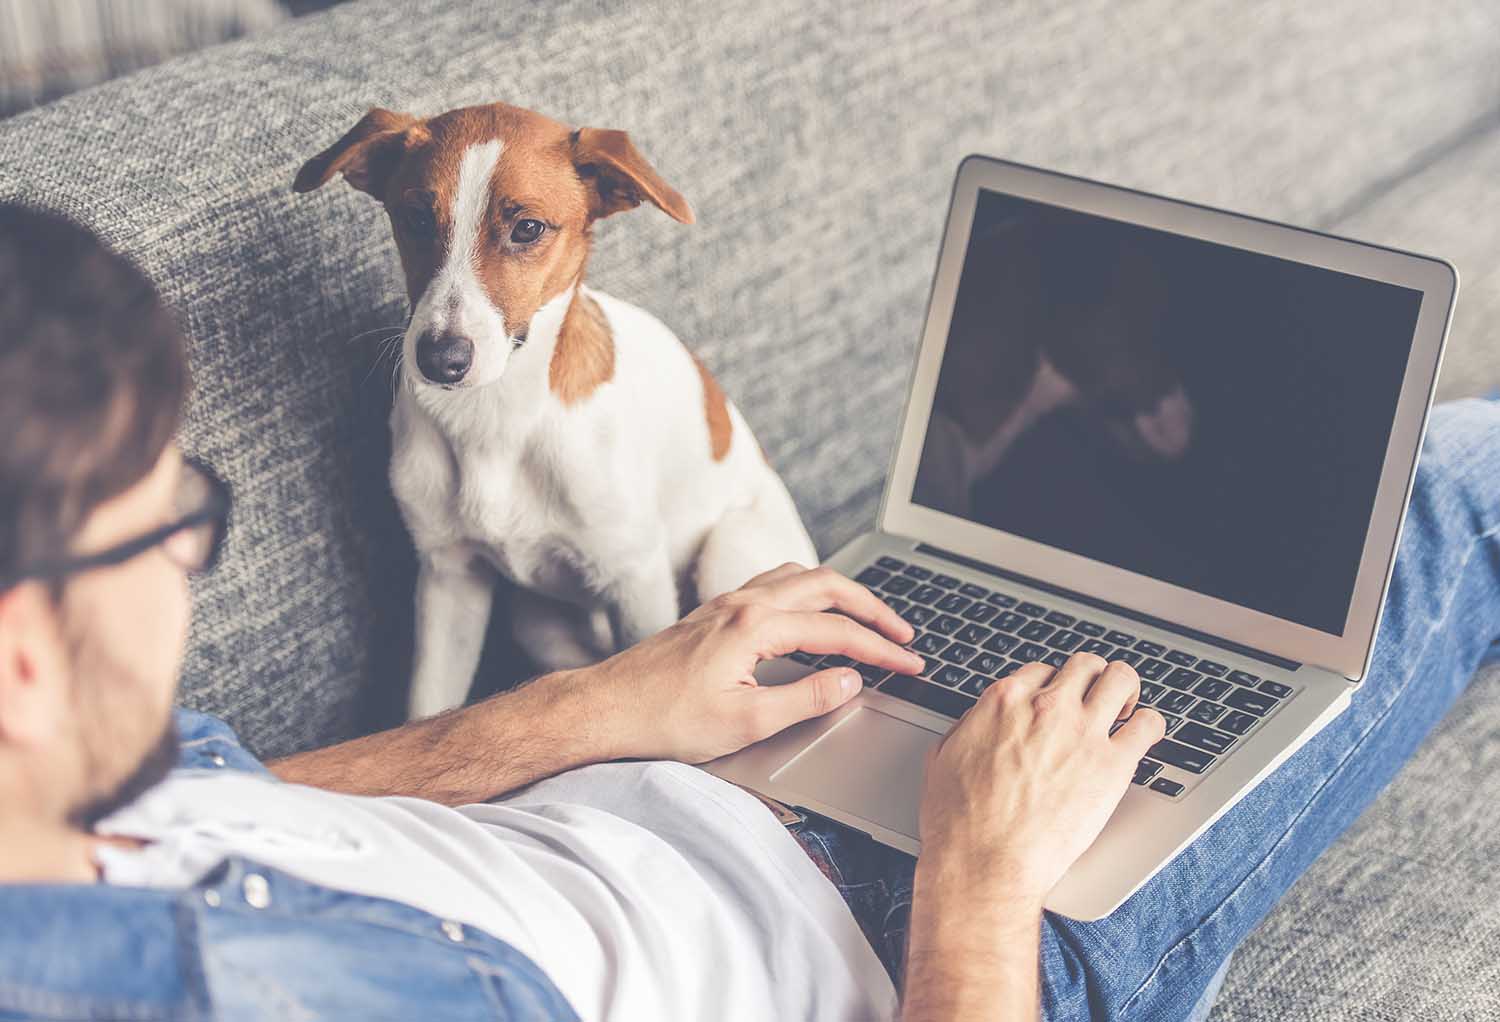 Online student working on laptop while dog watches